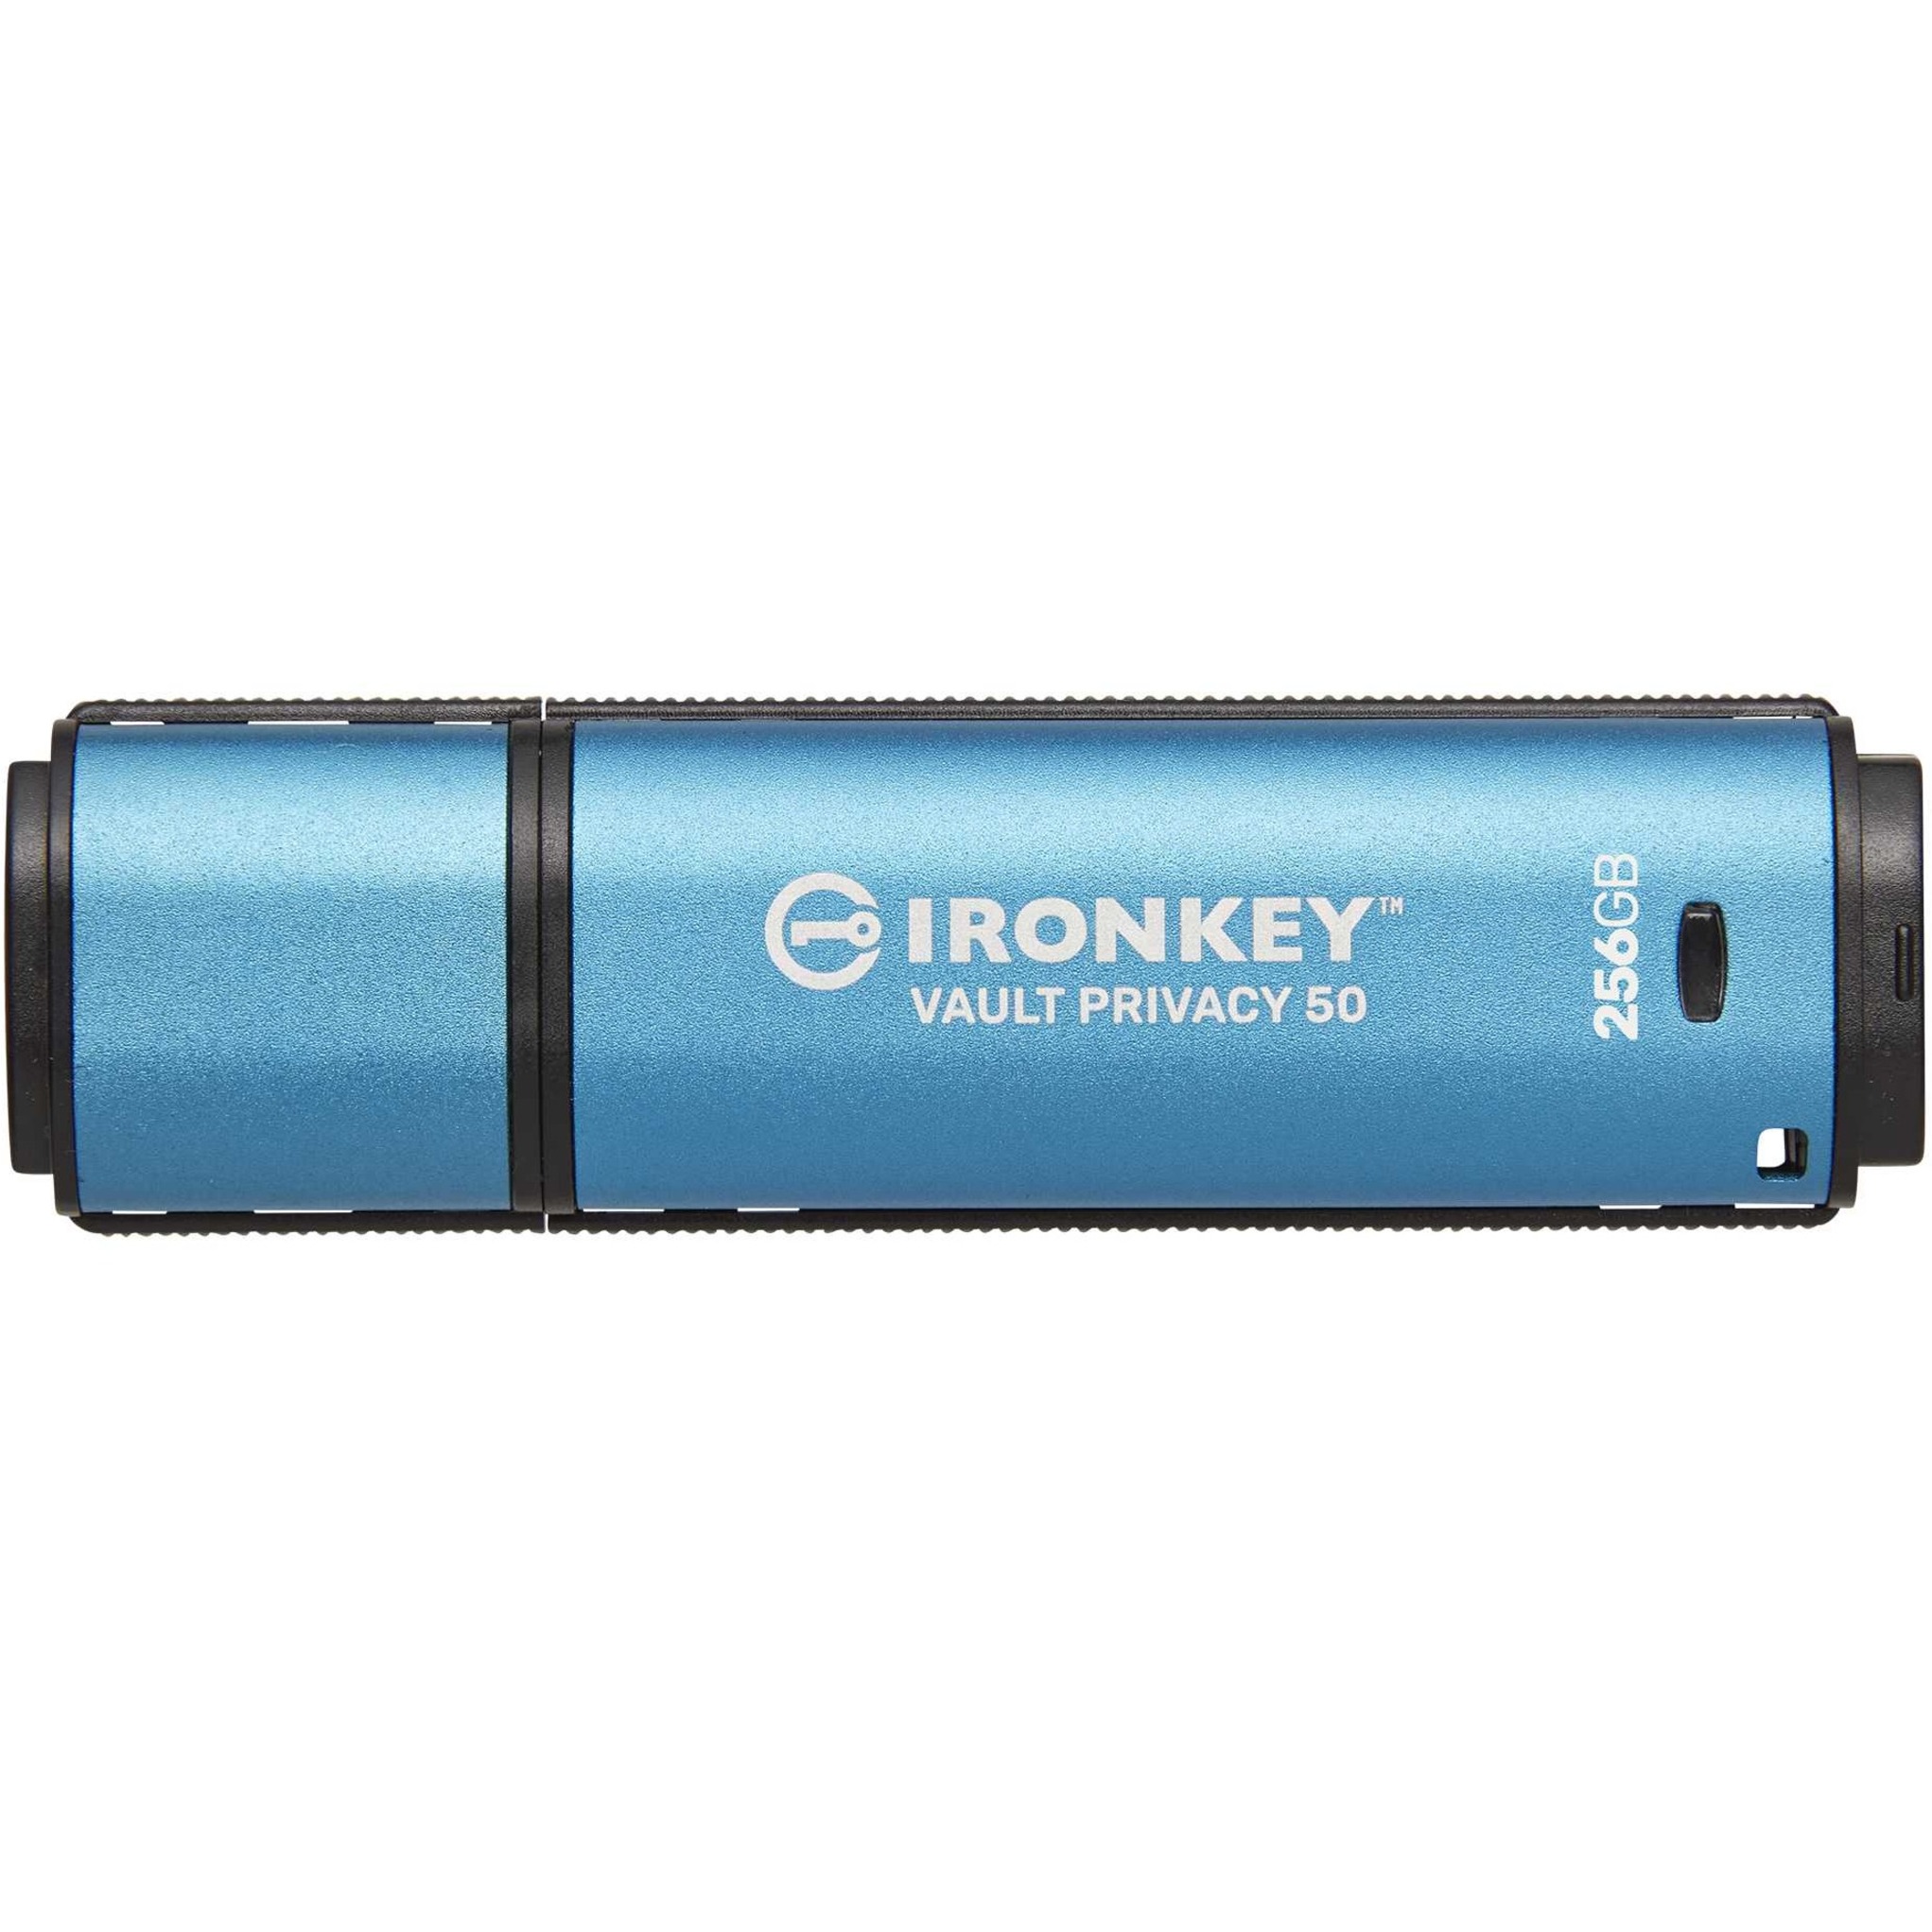 IronKey Vault Privacy 50 Series 256GB USB 3.2 (Gen 1) Type A Flash Drive - image 3 of 9